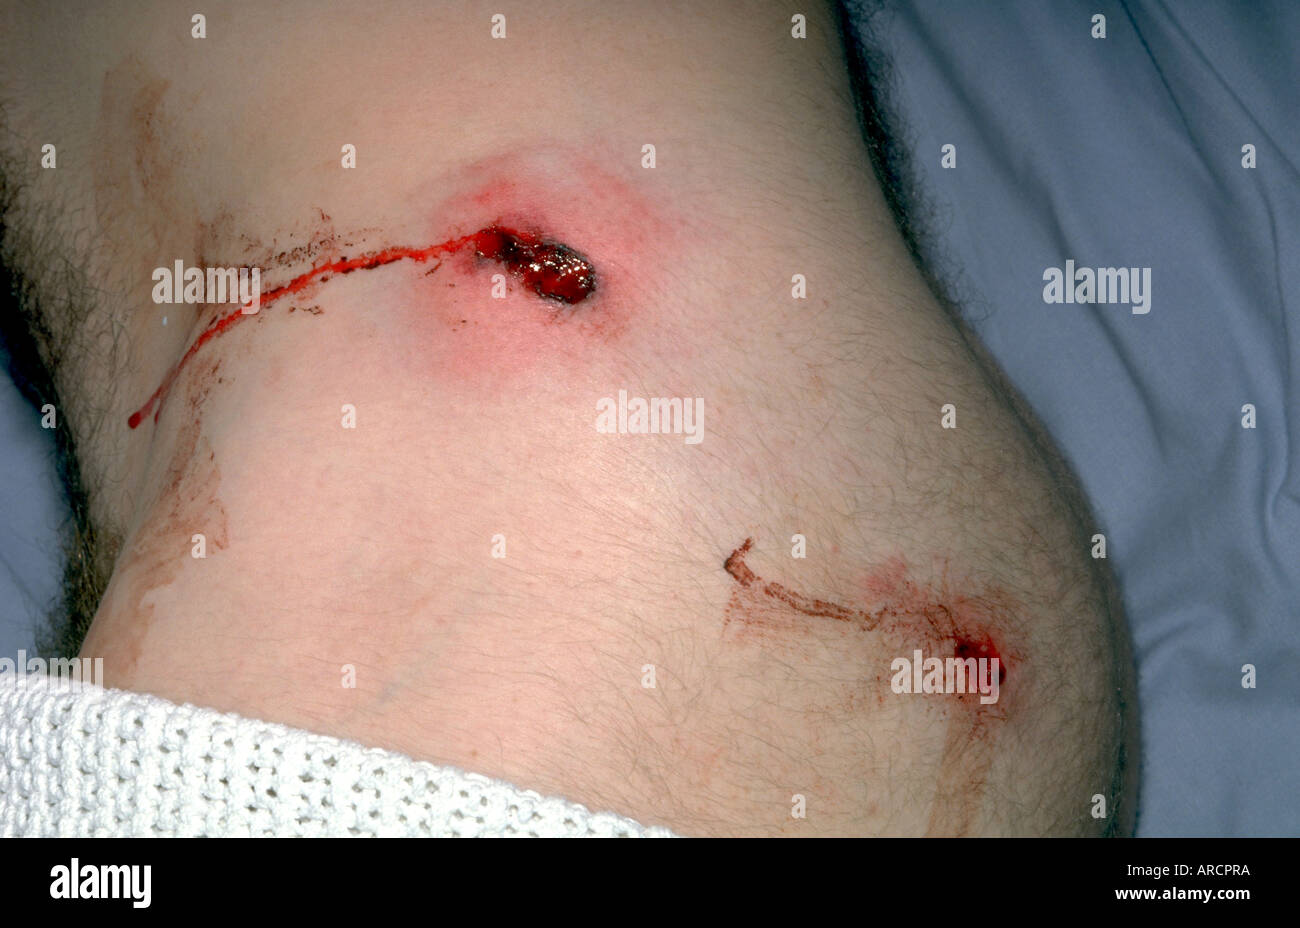 A photograph showing an entry and exit wound from a gunshot injury. Stock Photo